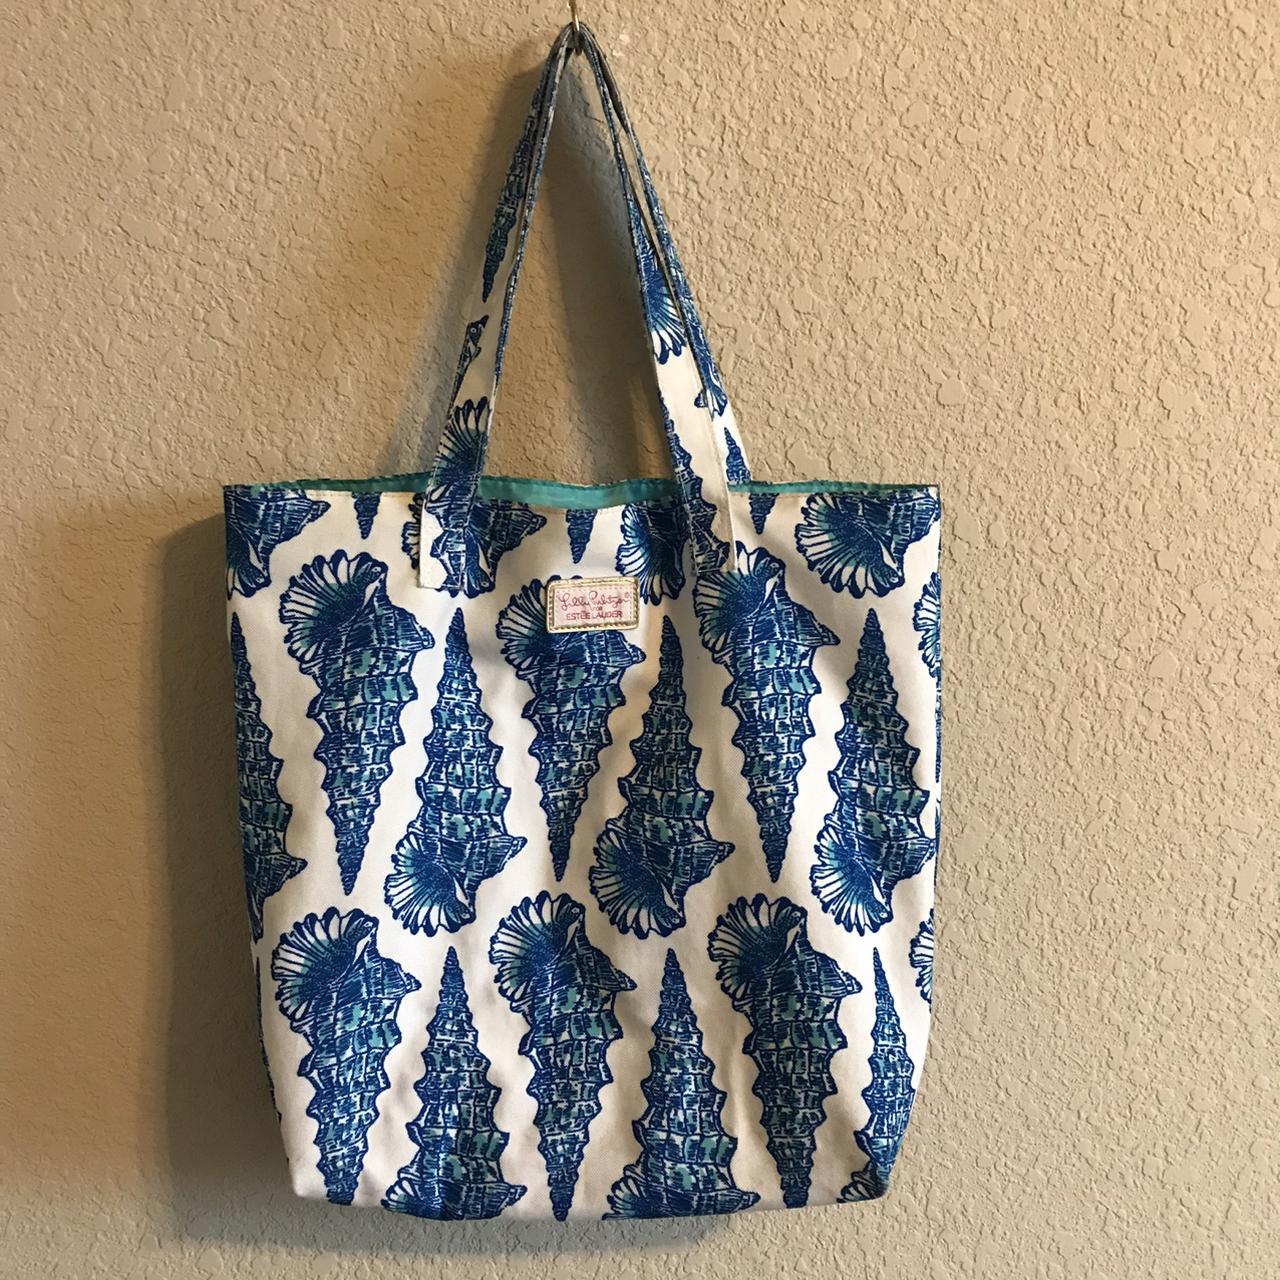 Lilly Pulitzer Women's Blue and White Bag